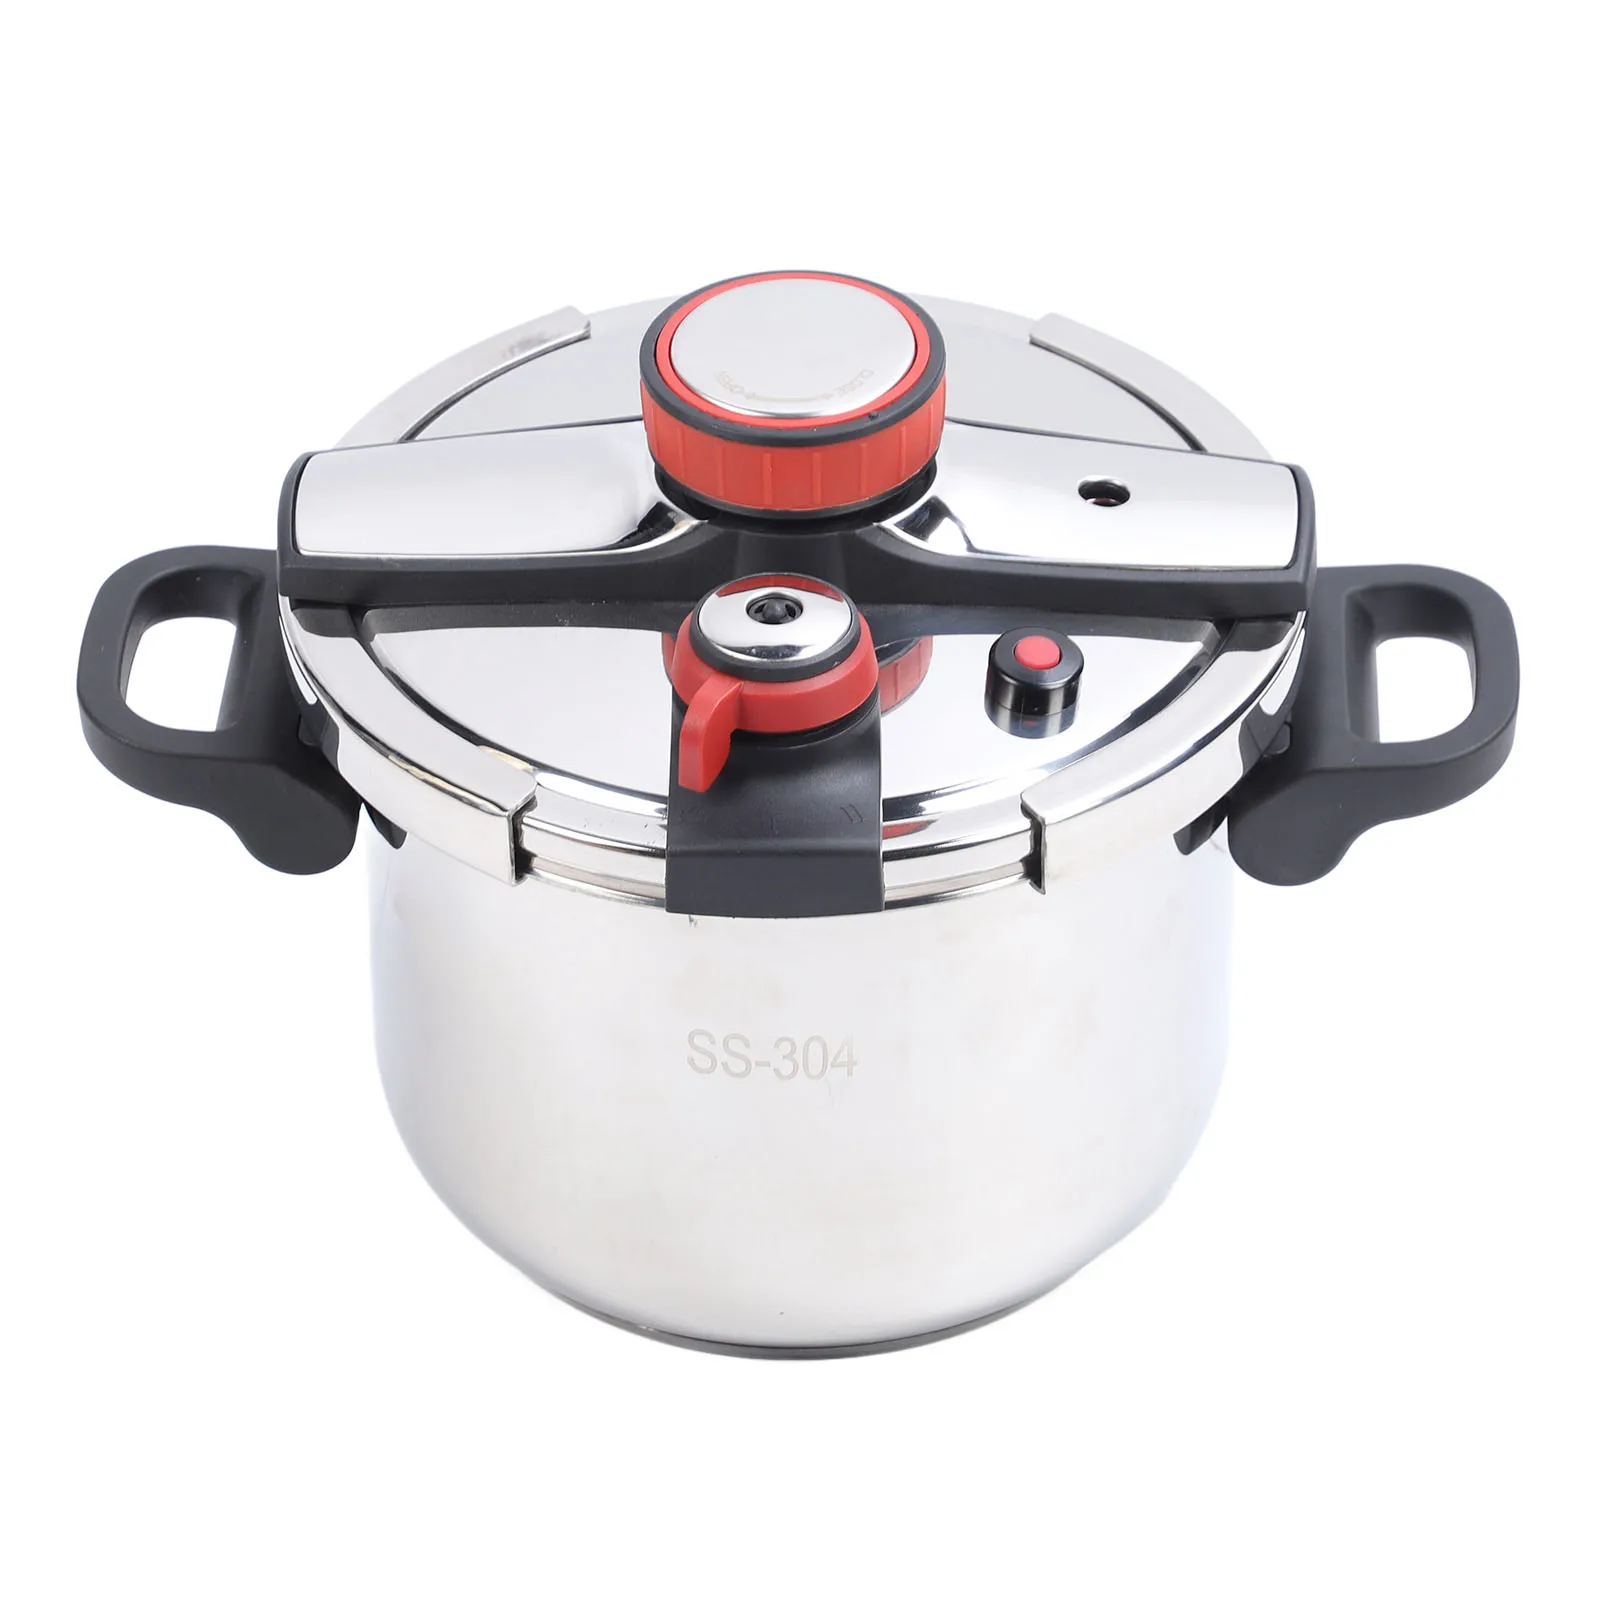 Pressure Cooker Fast Boiling Intelligent Control Pressure Cooker Pot 304 Stainless Steel Foldable Handle 100kpa for Gas Stove 0 10v low cost differential pressure sensor for hvac oxygen co2 gas wind pressure 0 100kpa differential pressure transmitter